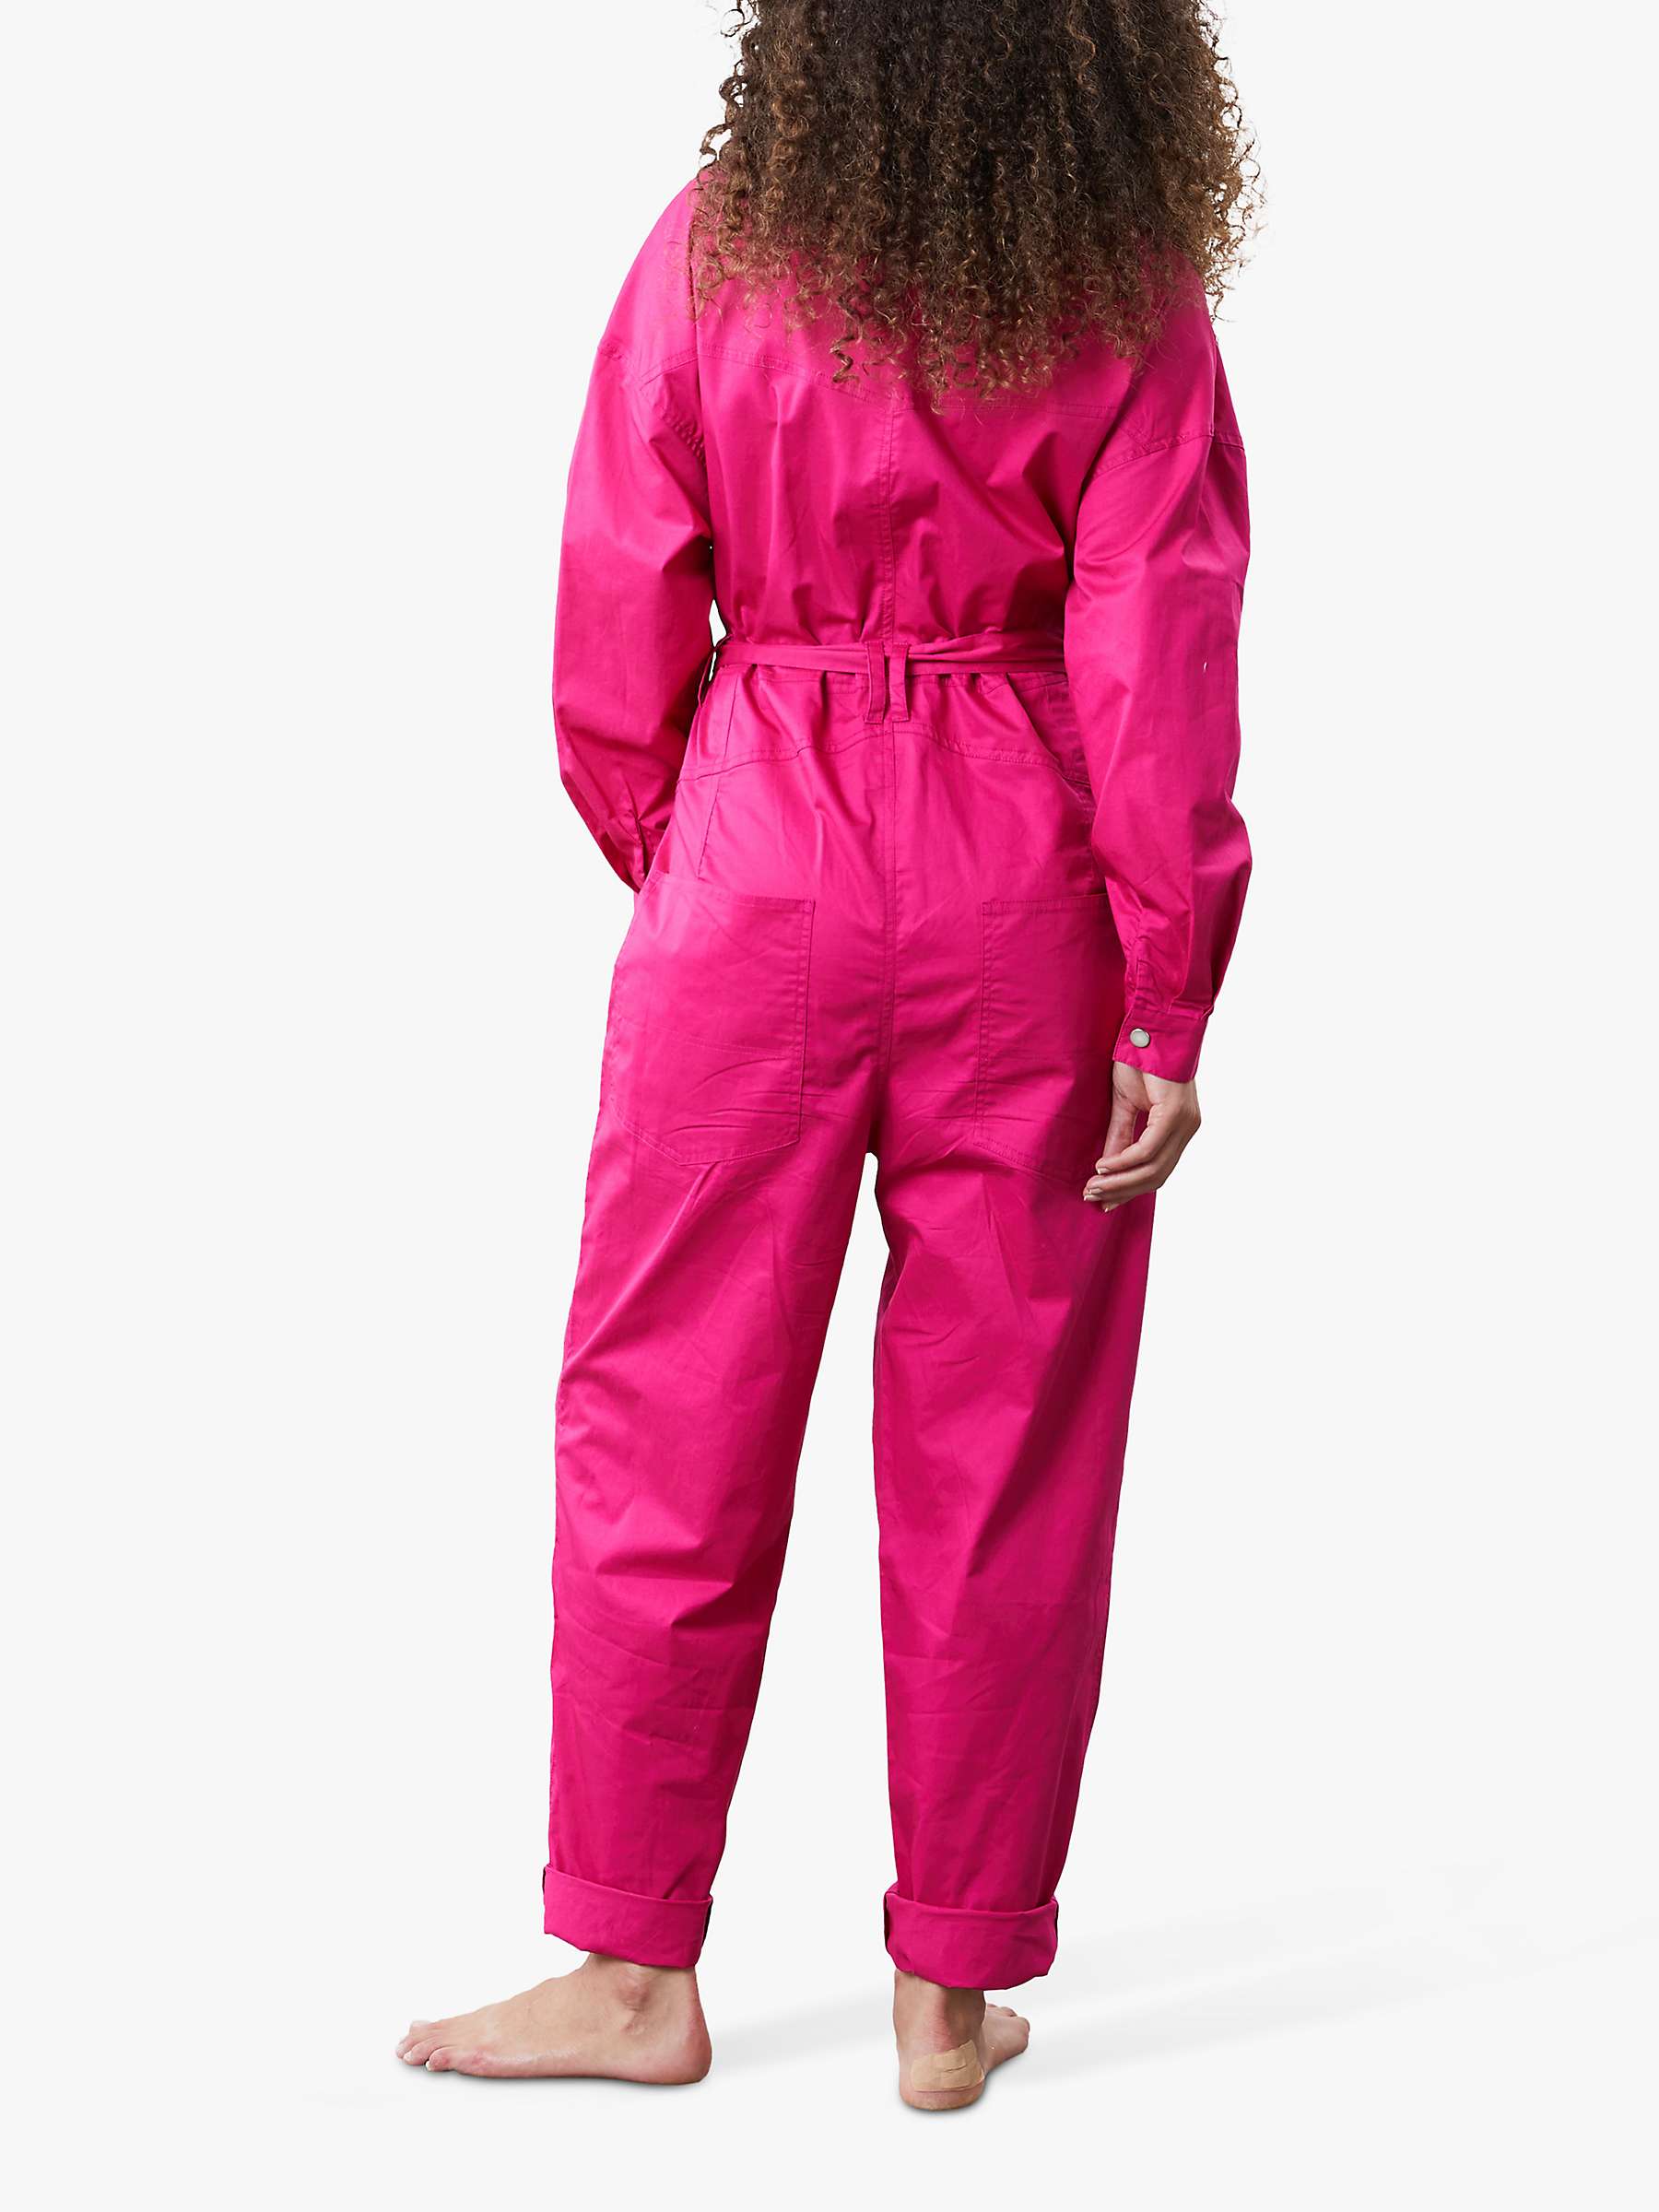 Buy Lollys Laundry Yuko Cotton Relaxed Fit Jumpsuit Online at johnlewis.com